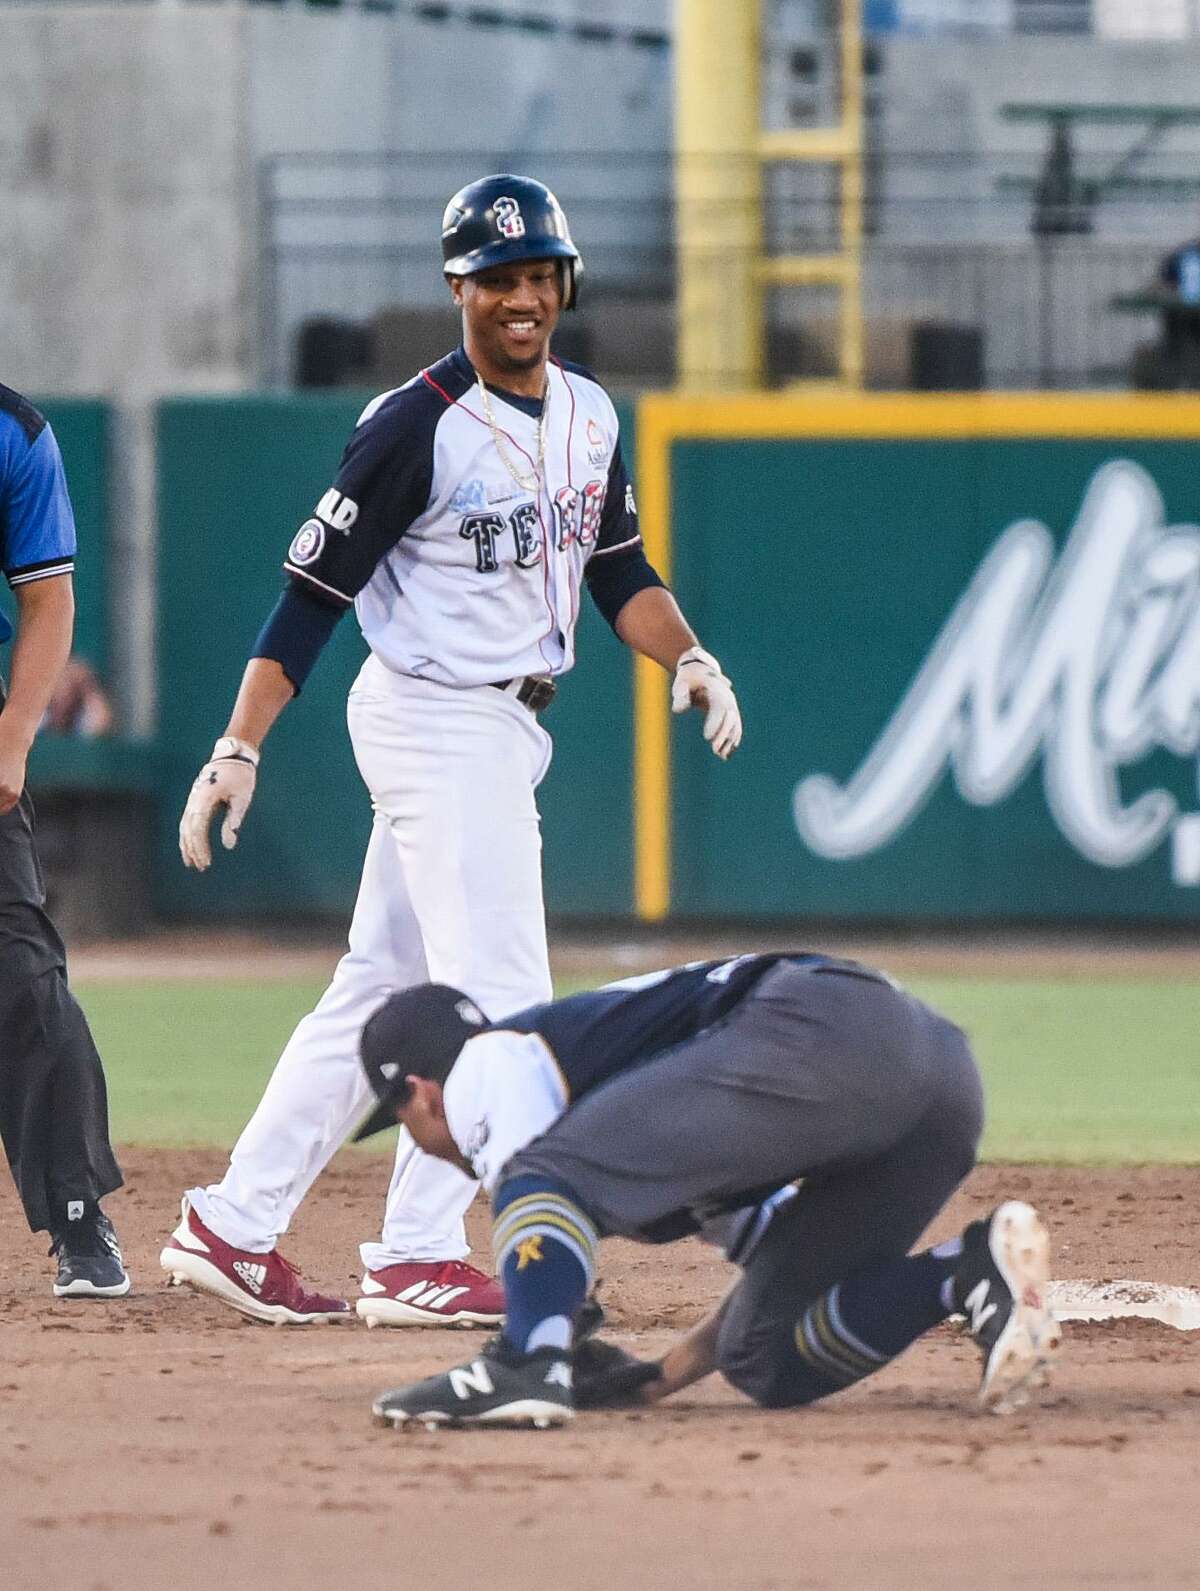 Johnny Davis and the Tecolotes capitalized on five errors by Aguascalientes in the 9-5 victory on Tuesday night.